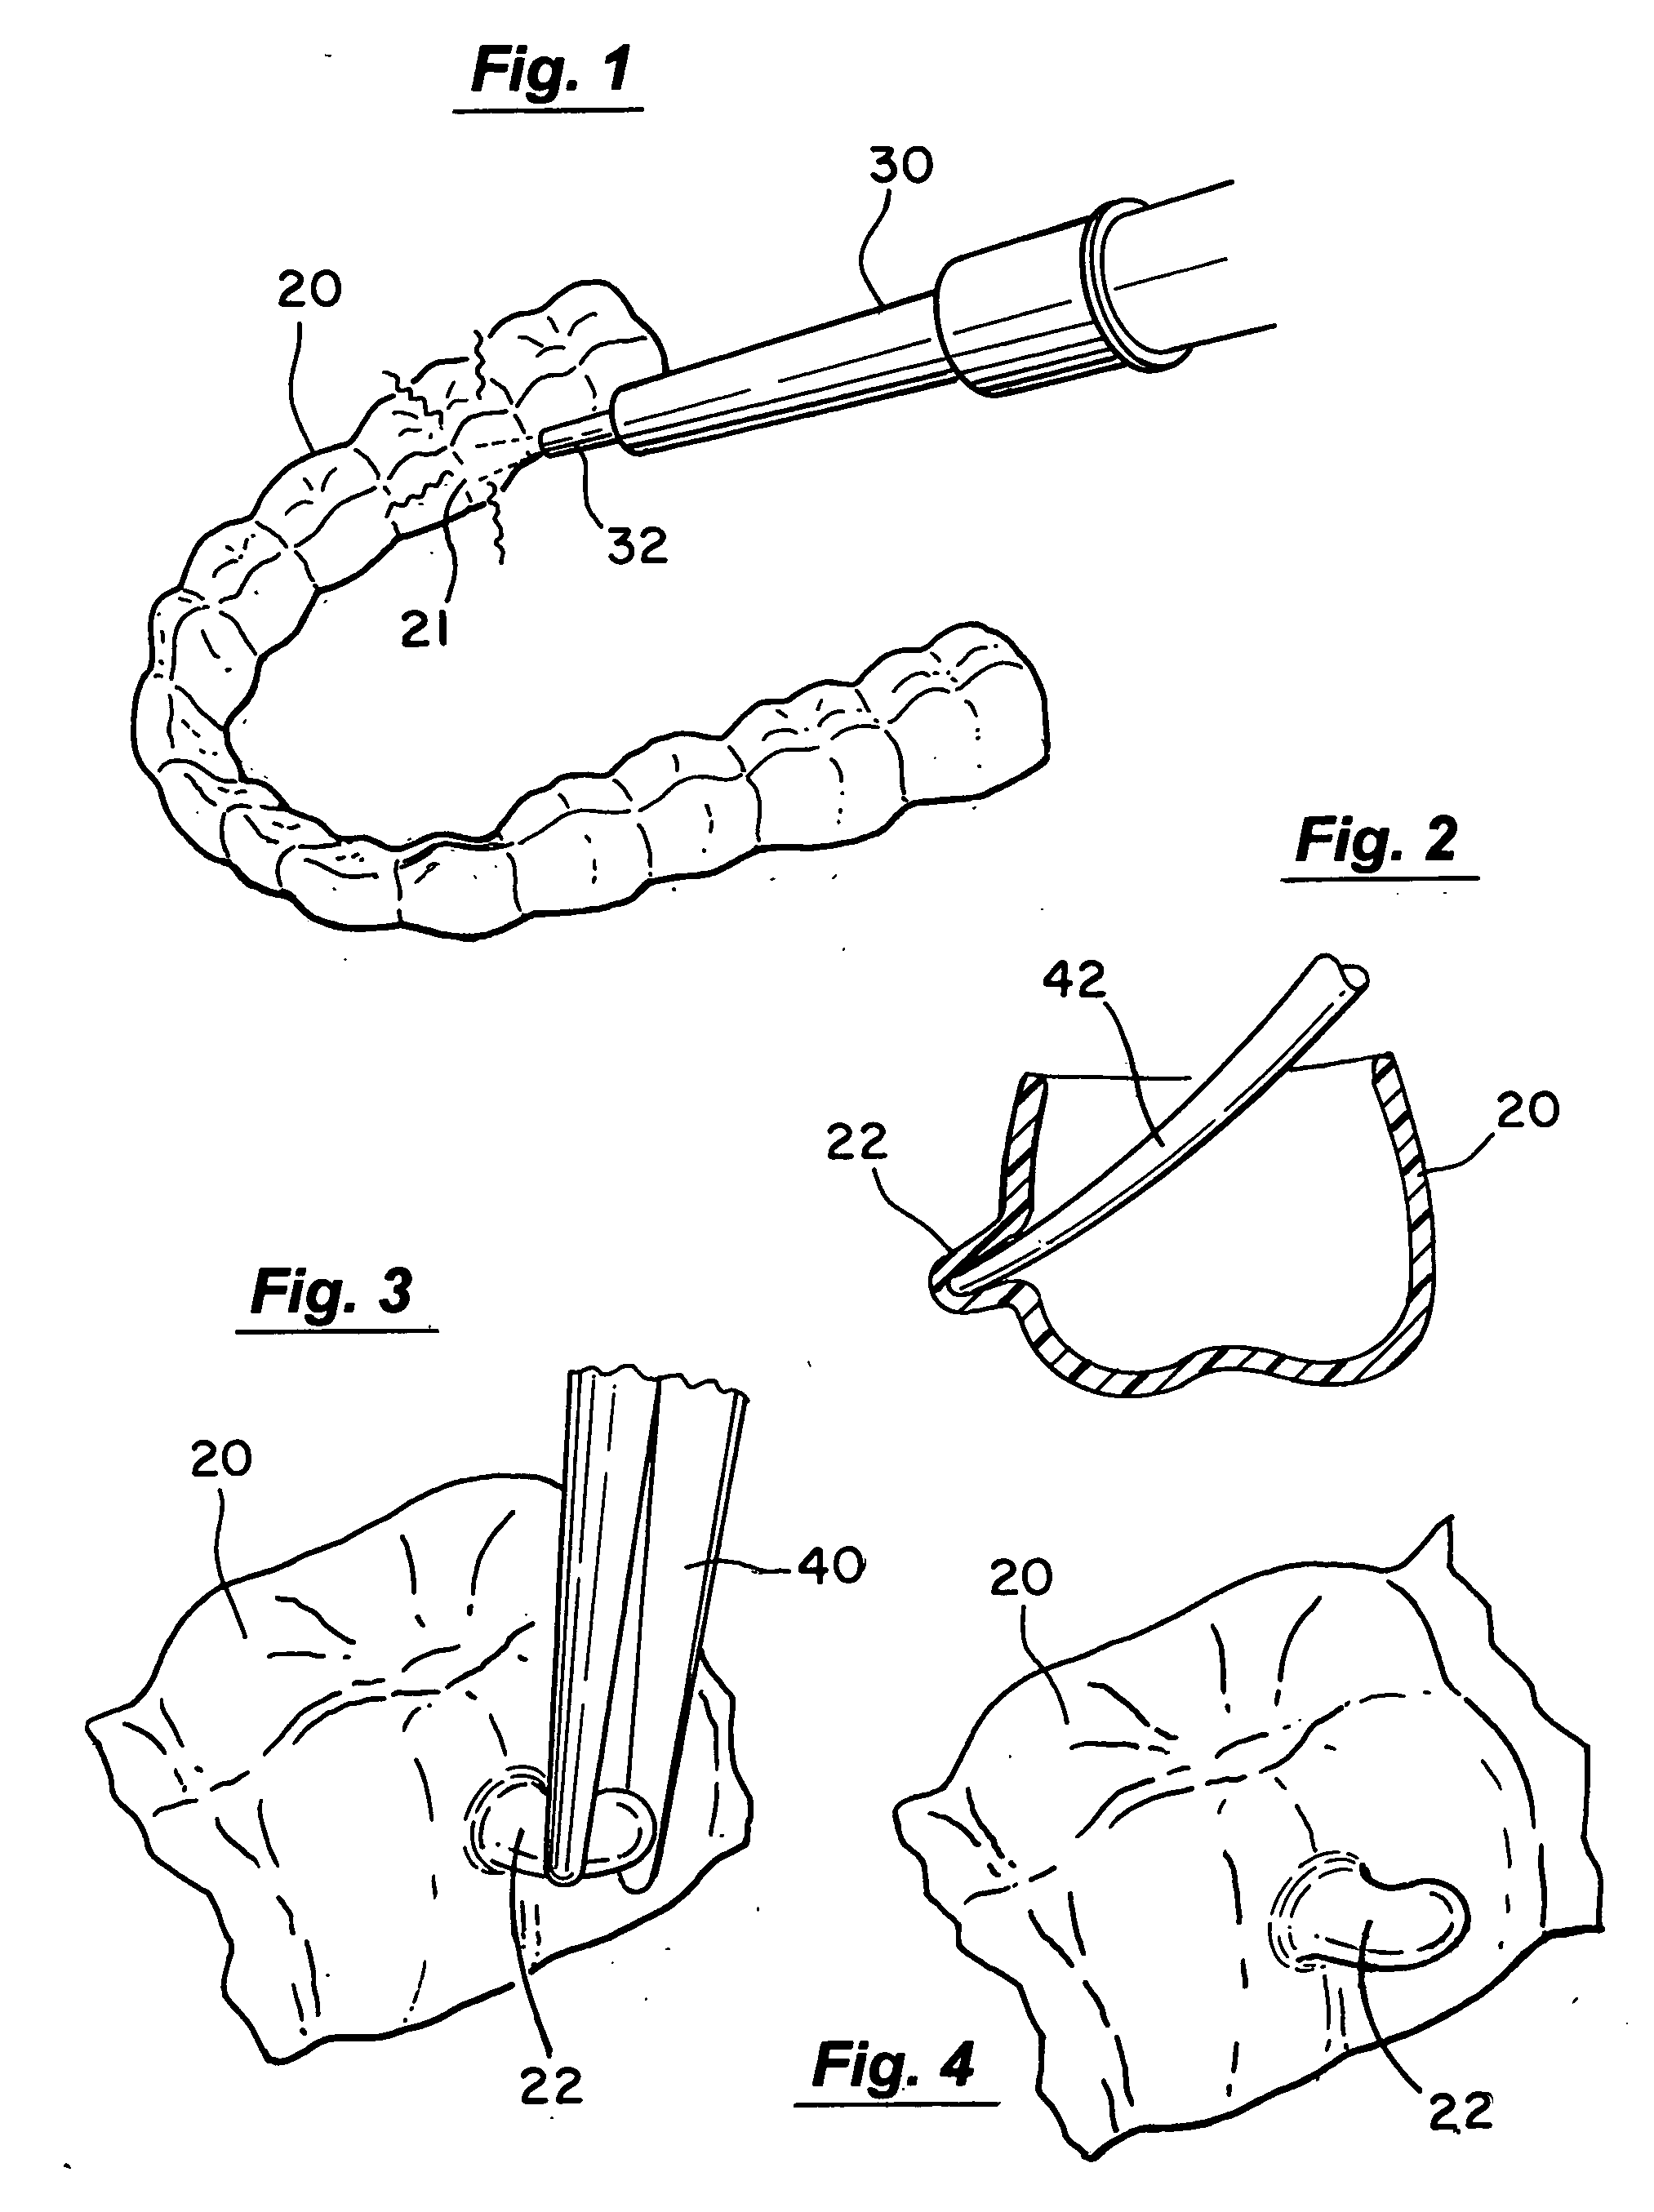 Method for creating features in orthodontic aligners